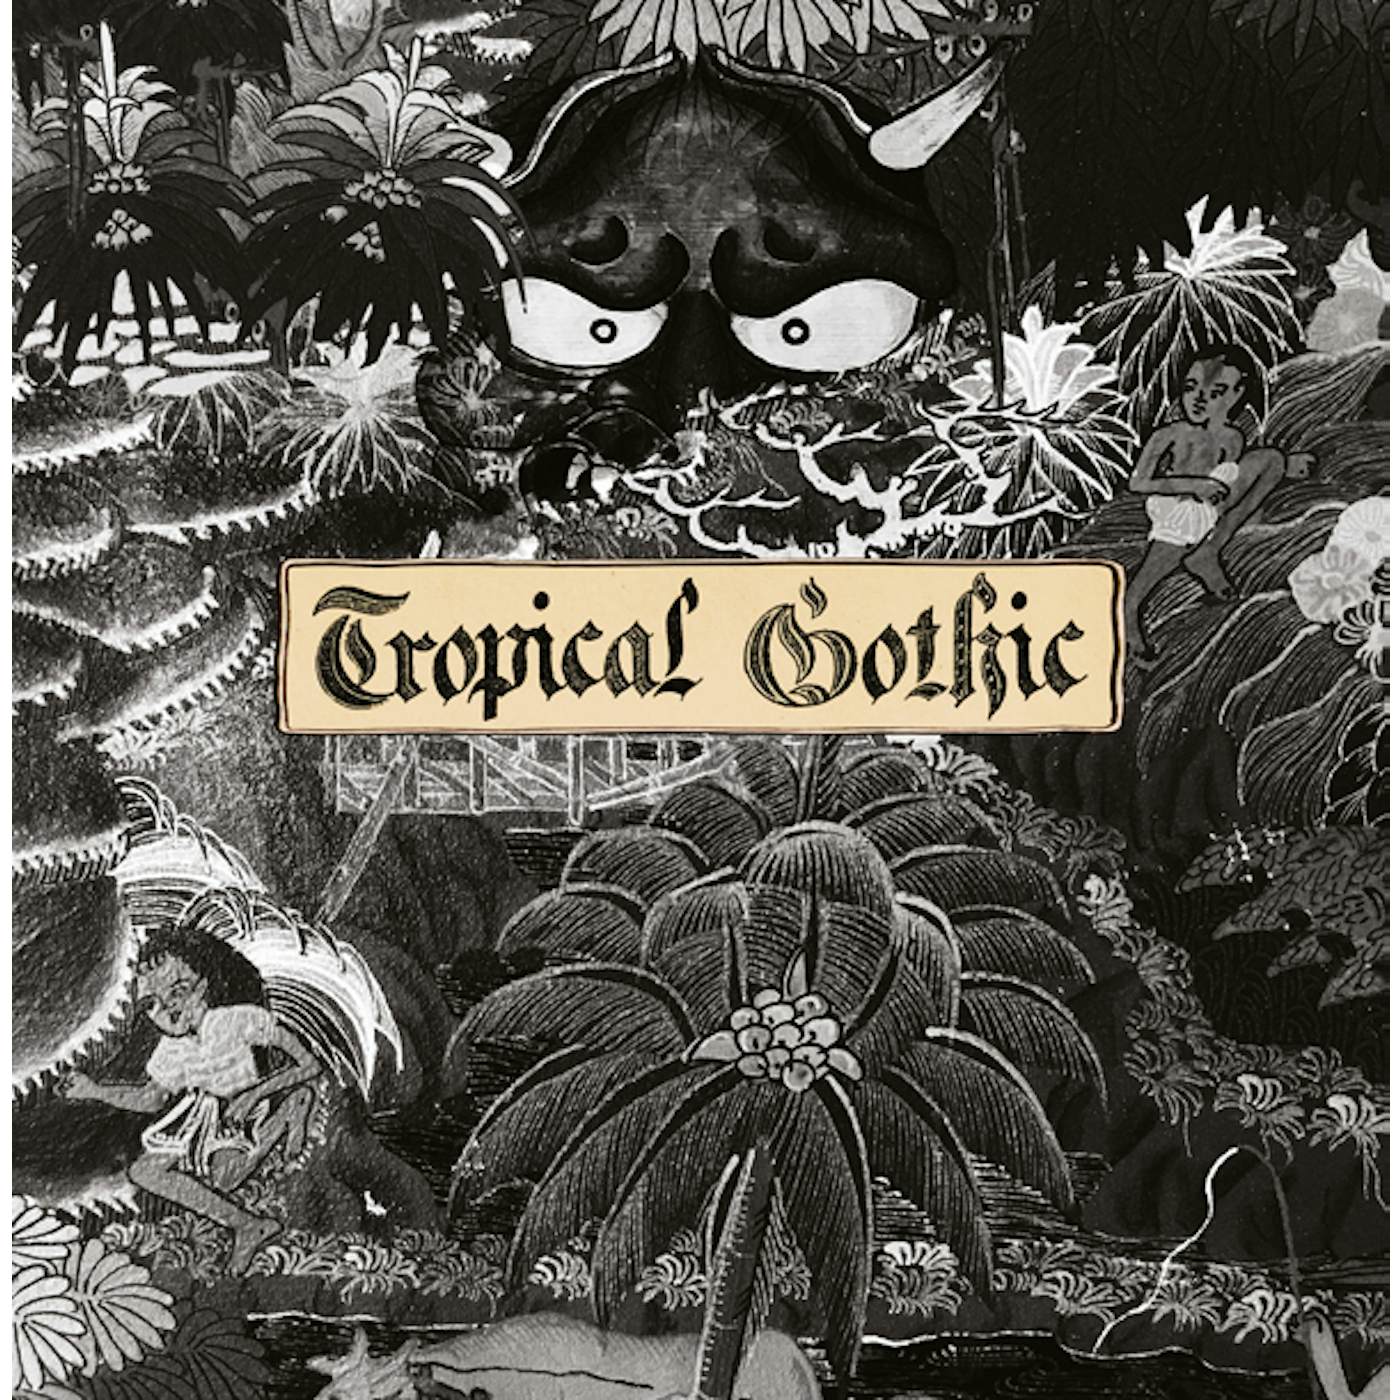 Mike Cooper Tropical Gothic Vinyl Record